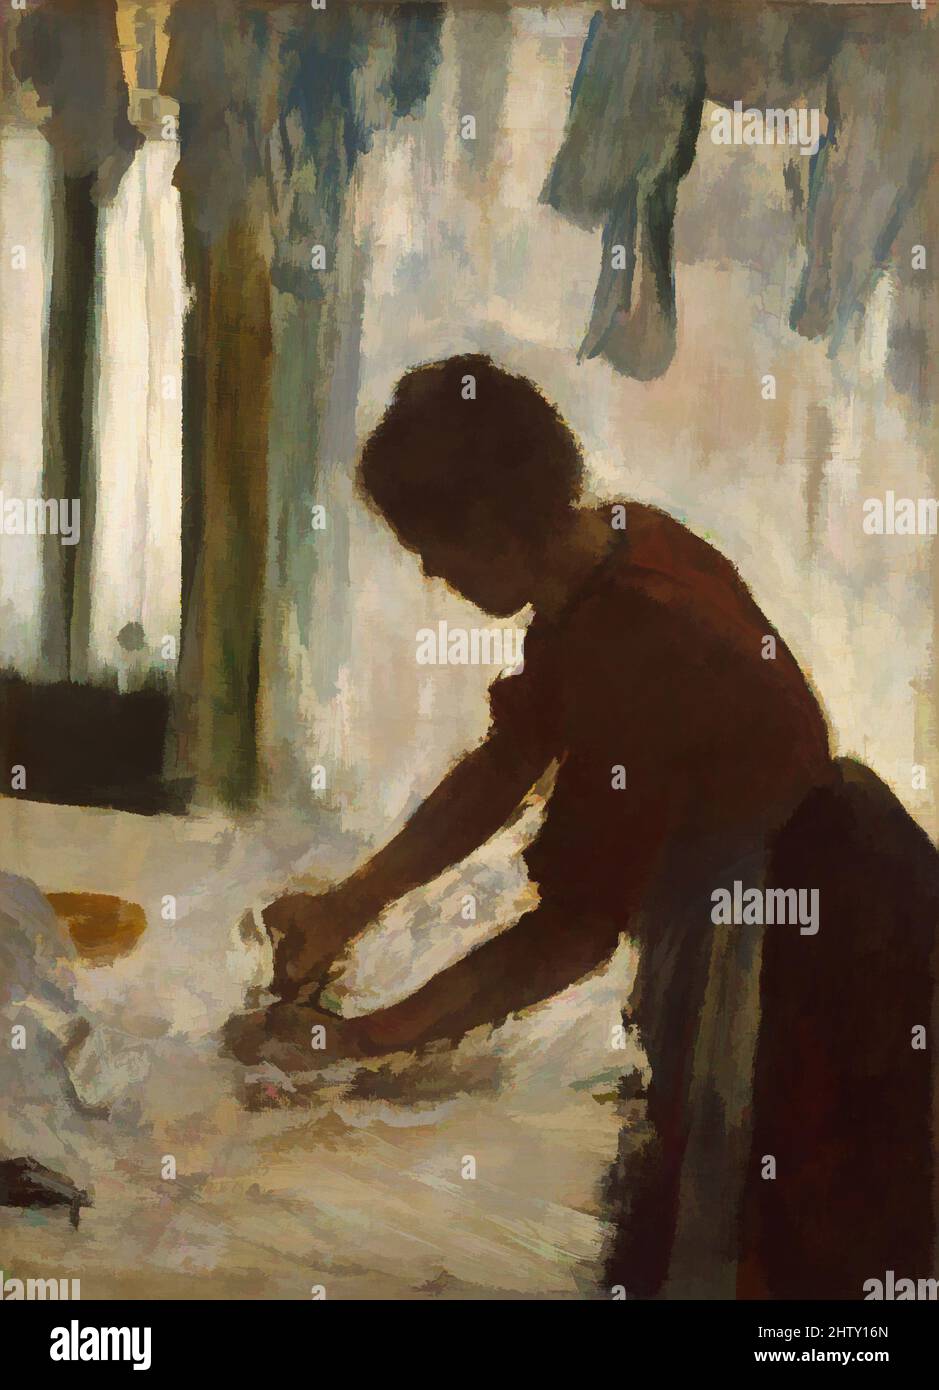 Art inspired by A Woman Ironing, 1873, Oil on canvas, 21 3/8 x 15 1/2 in. (54.3 x 39.4 cm), Paintings, Edgar Degas (French, Paris 1834–1917 Paris), Much as Degas was fascinated by the movements of dancers, he was also intrigued by the repetitive, specialized gestures made by, Classic works modernized by Artotop with a splash of modernity. Shapes, color and value, eye-catching visual impact on art. Emotions through freedom of artworks in a contemporary way. A timeless message pursuing a wildly creative new direction. Artists turning to the digital medium and creating the Artotop NFT Stock Photo